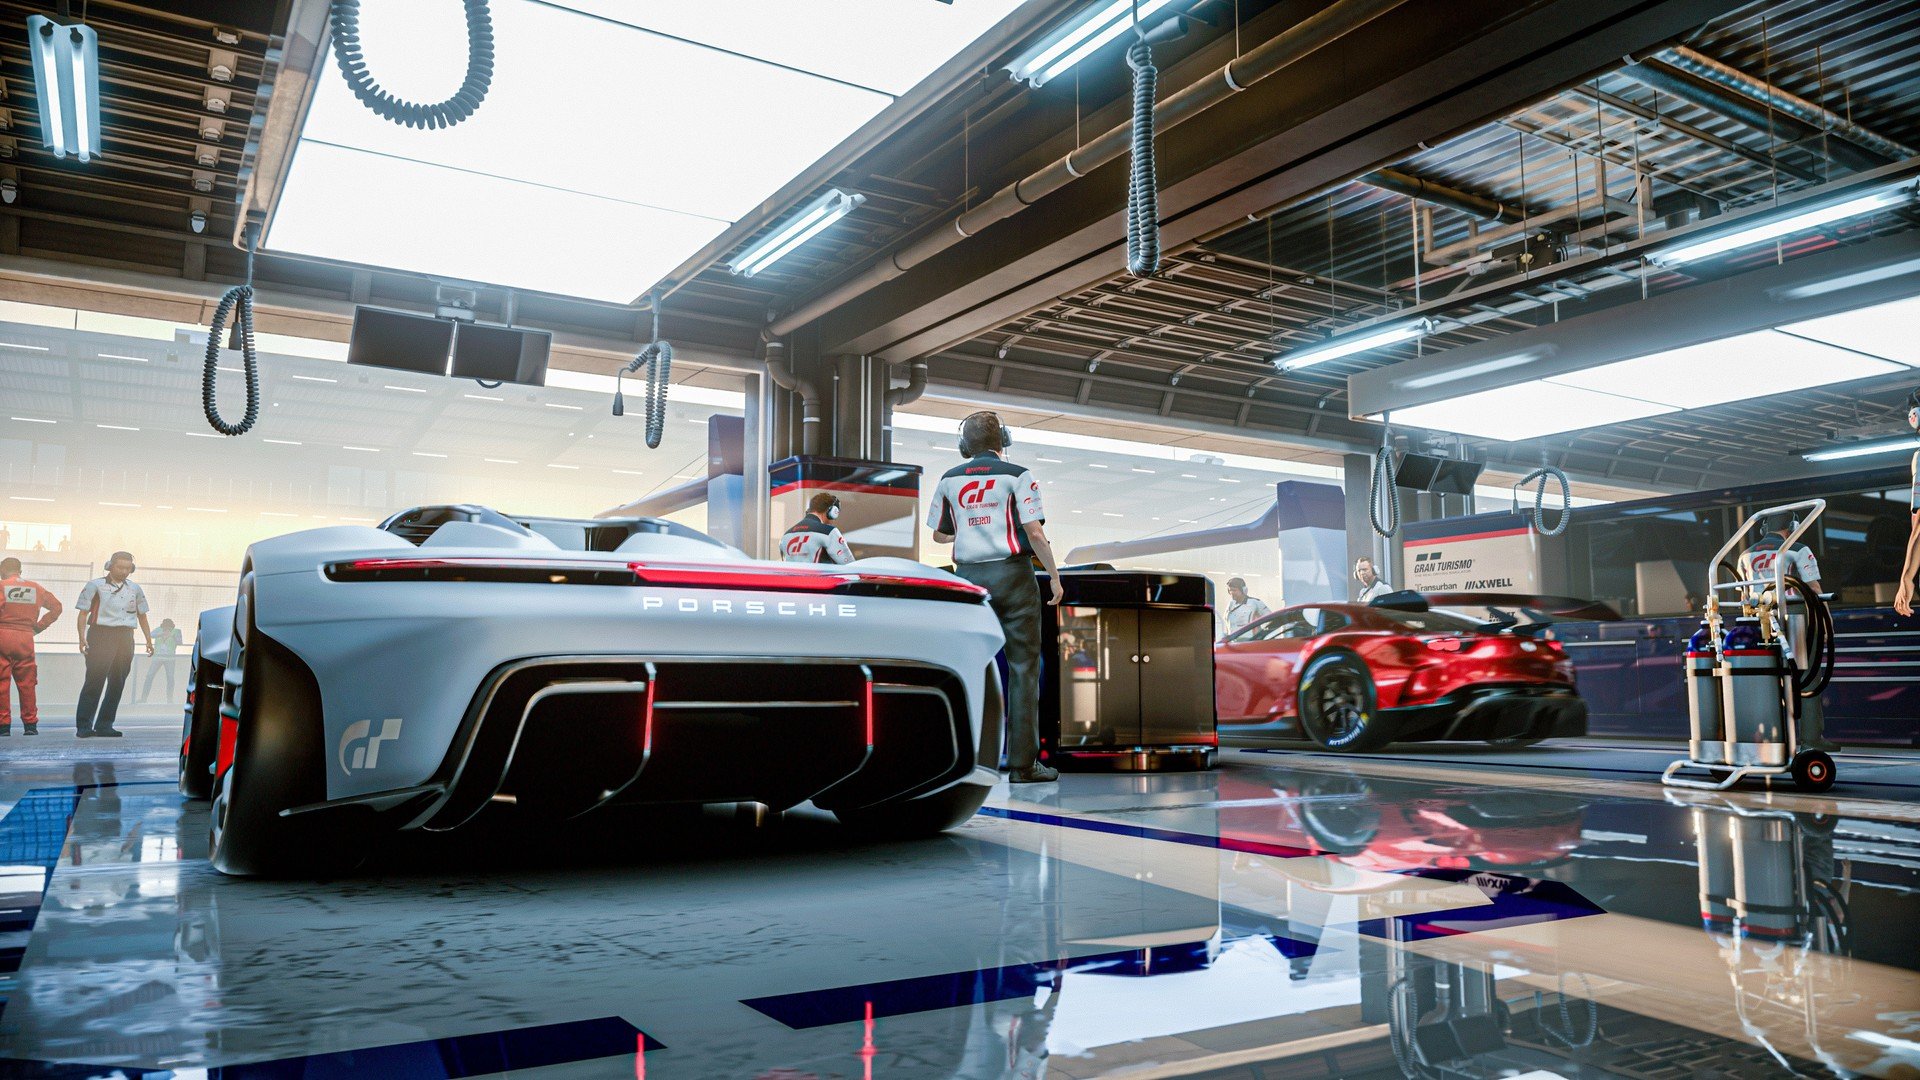 Gran Turismo 7 update with SPEC II 1.40 arrives today – new cars